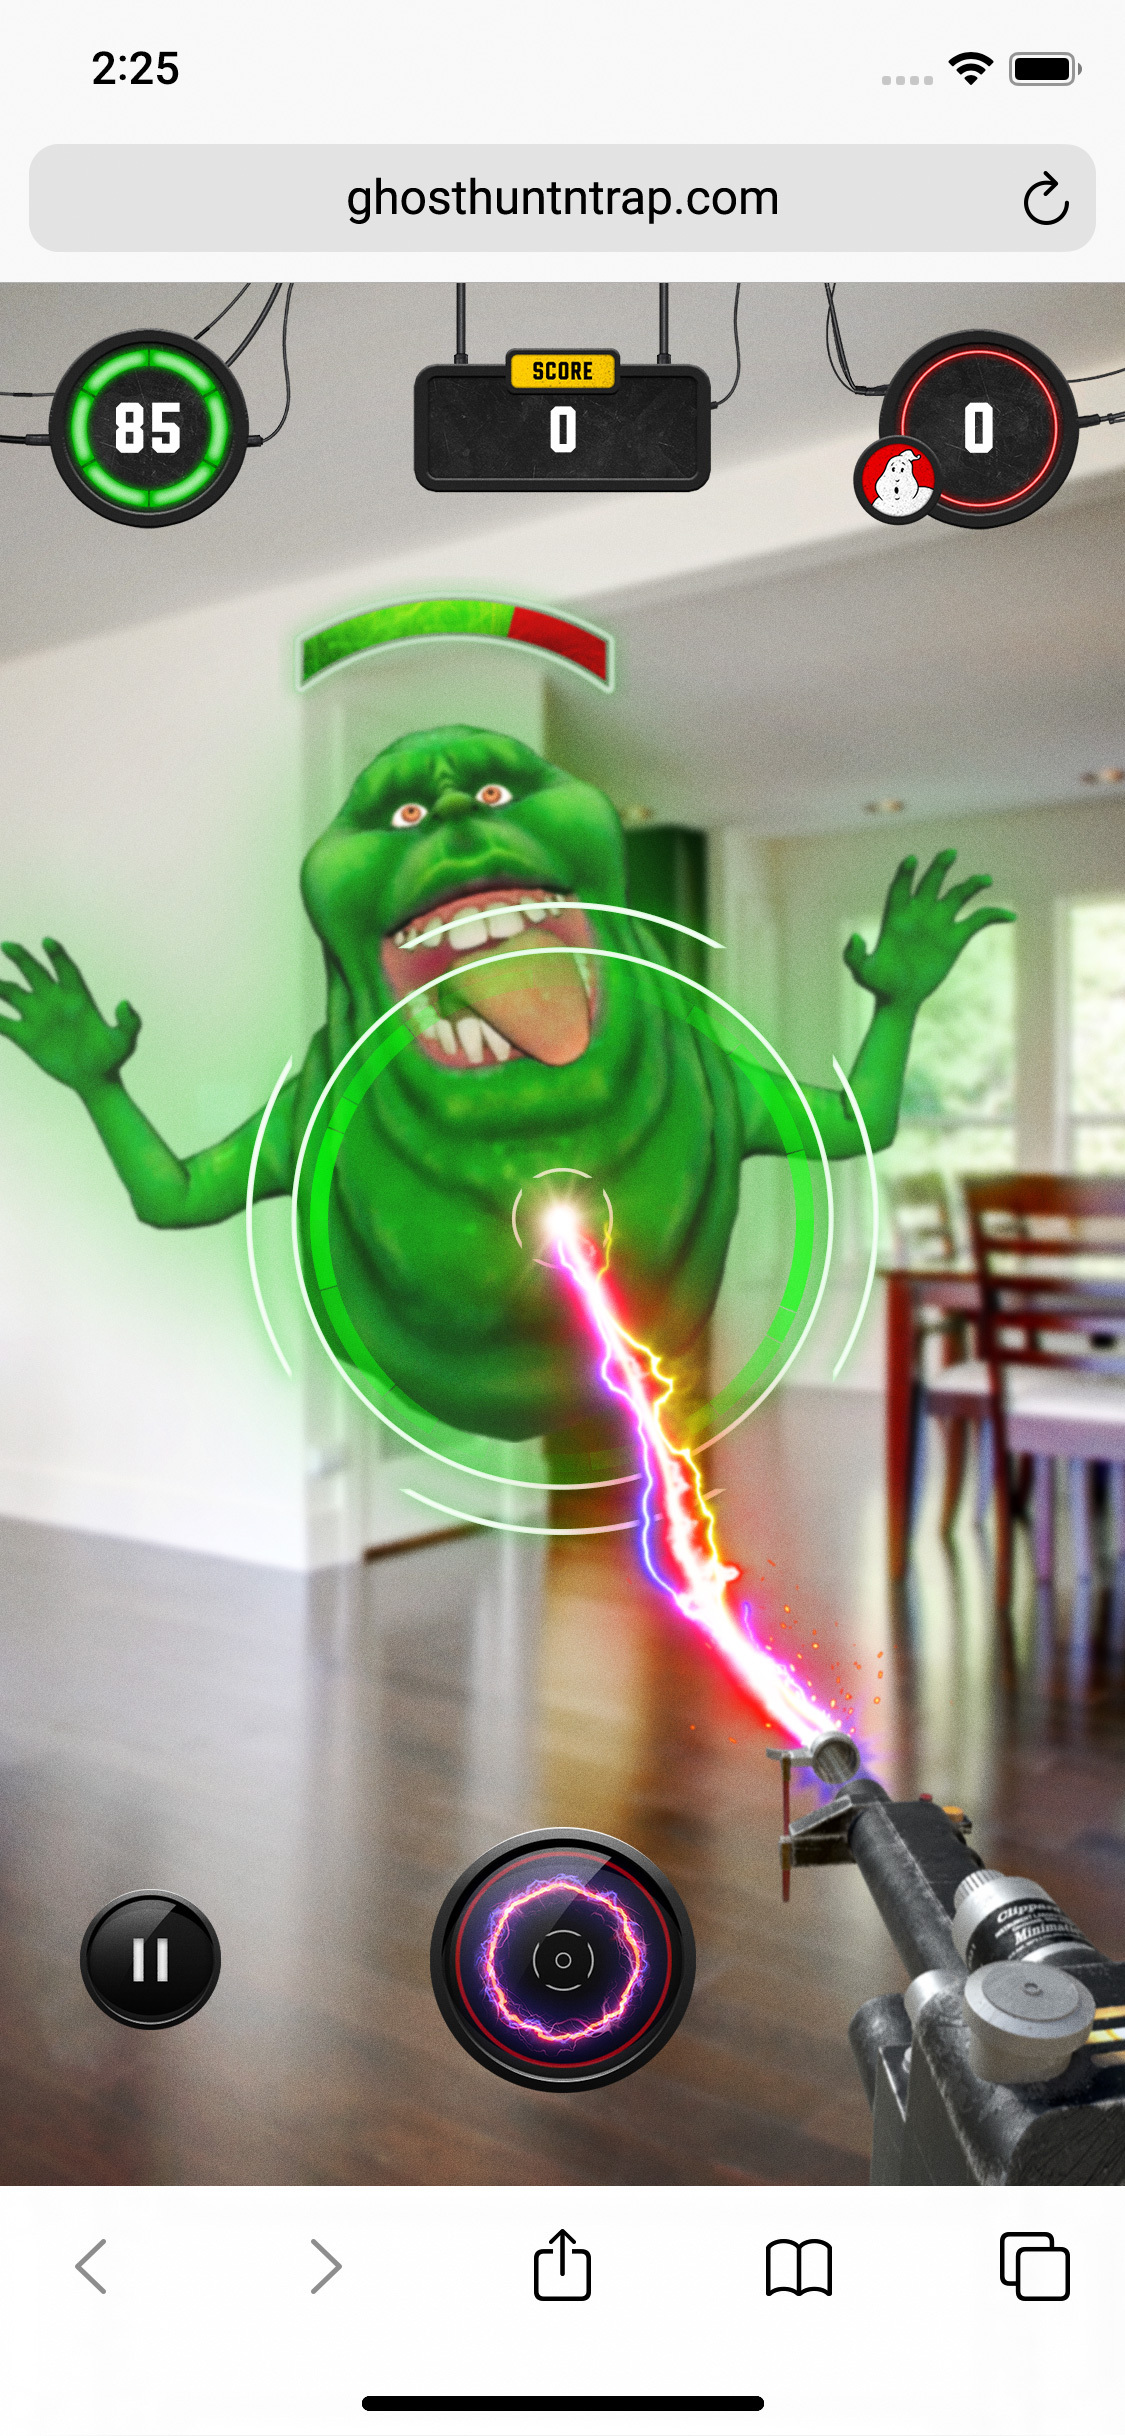 The Haunted Candy Hunt AR Game Lets You Become A Ghostbuster